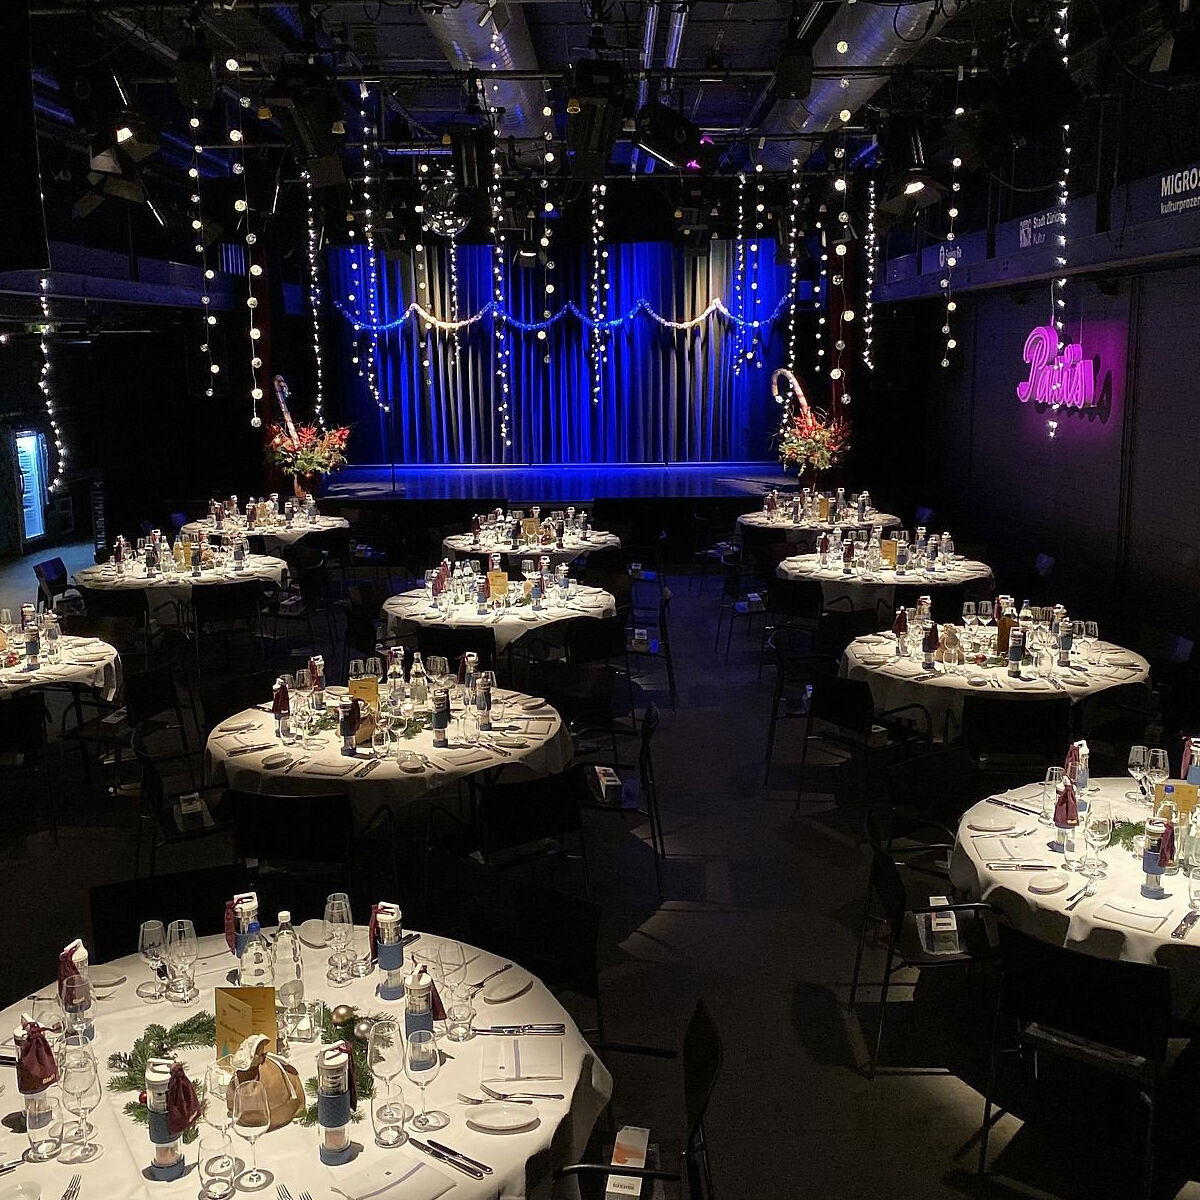 Company party at the Millers Theater Zurich, offered by Mühle Tiefenbrunnen